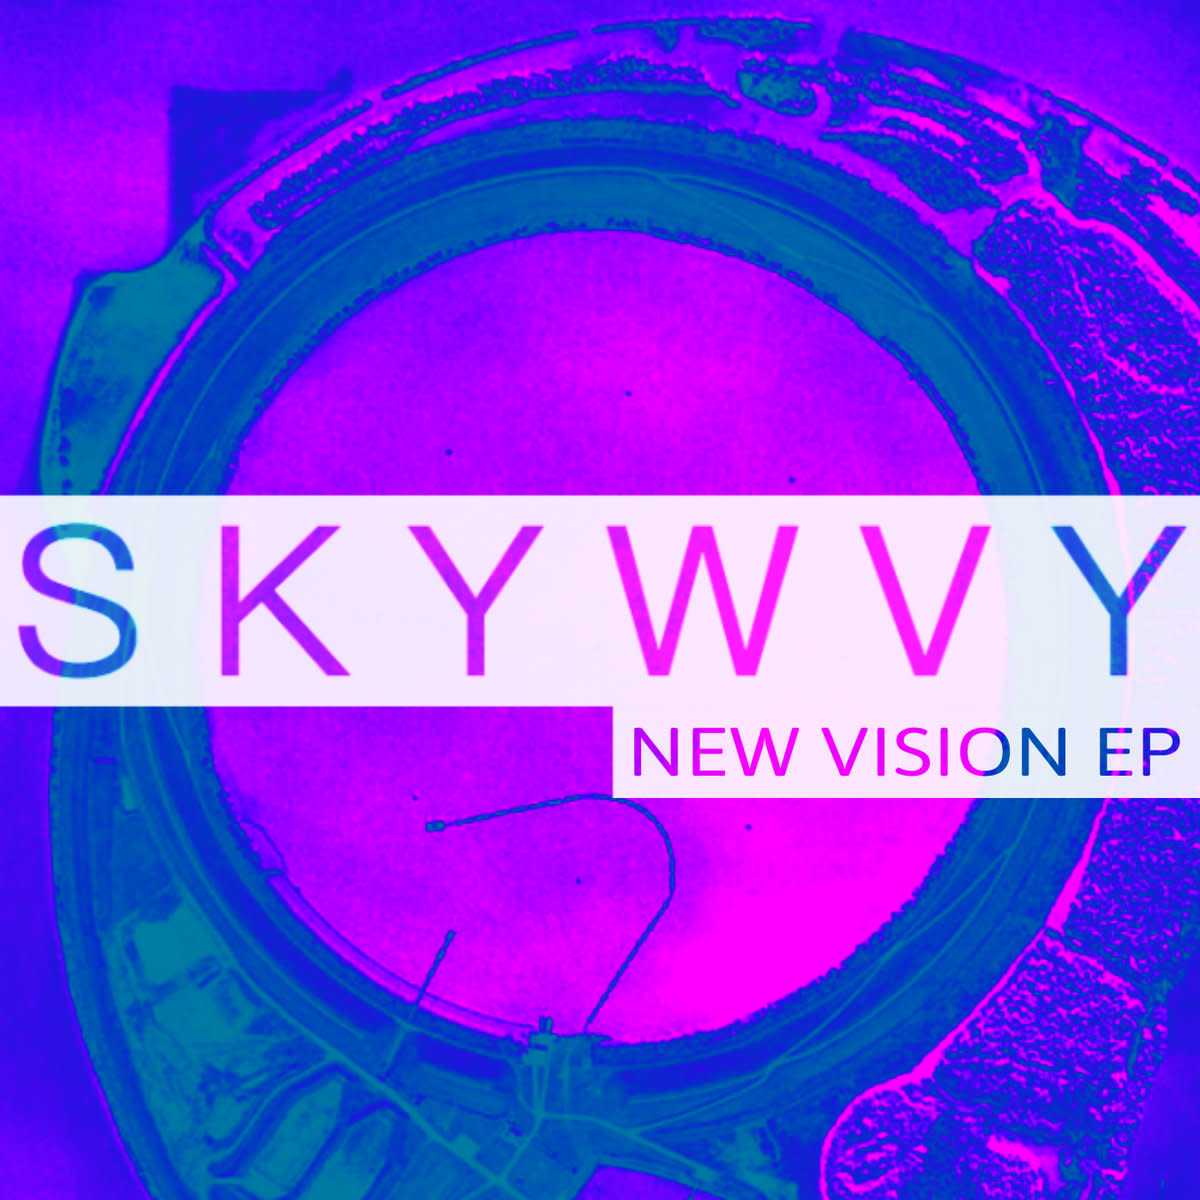 synth-ep-review-new-vision-by-s-k-y-w-v-y